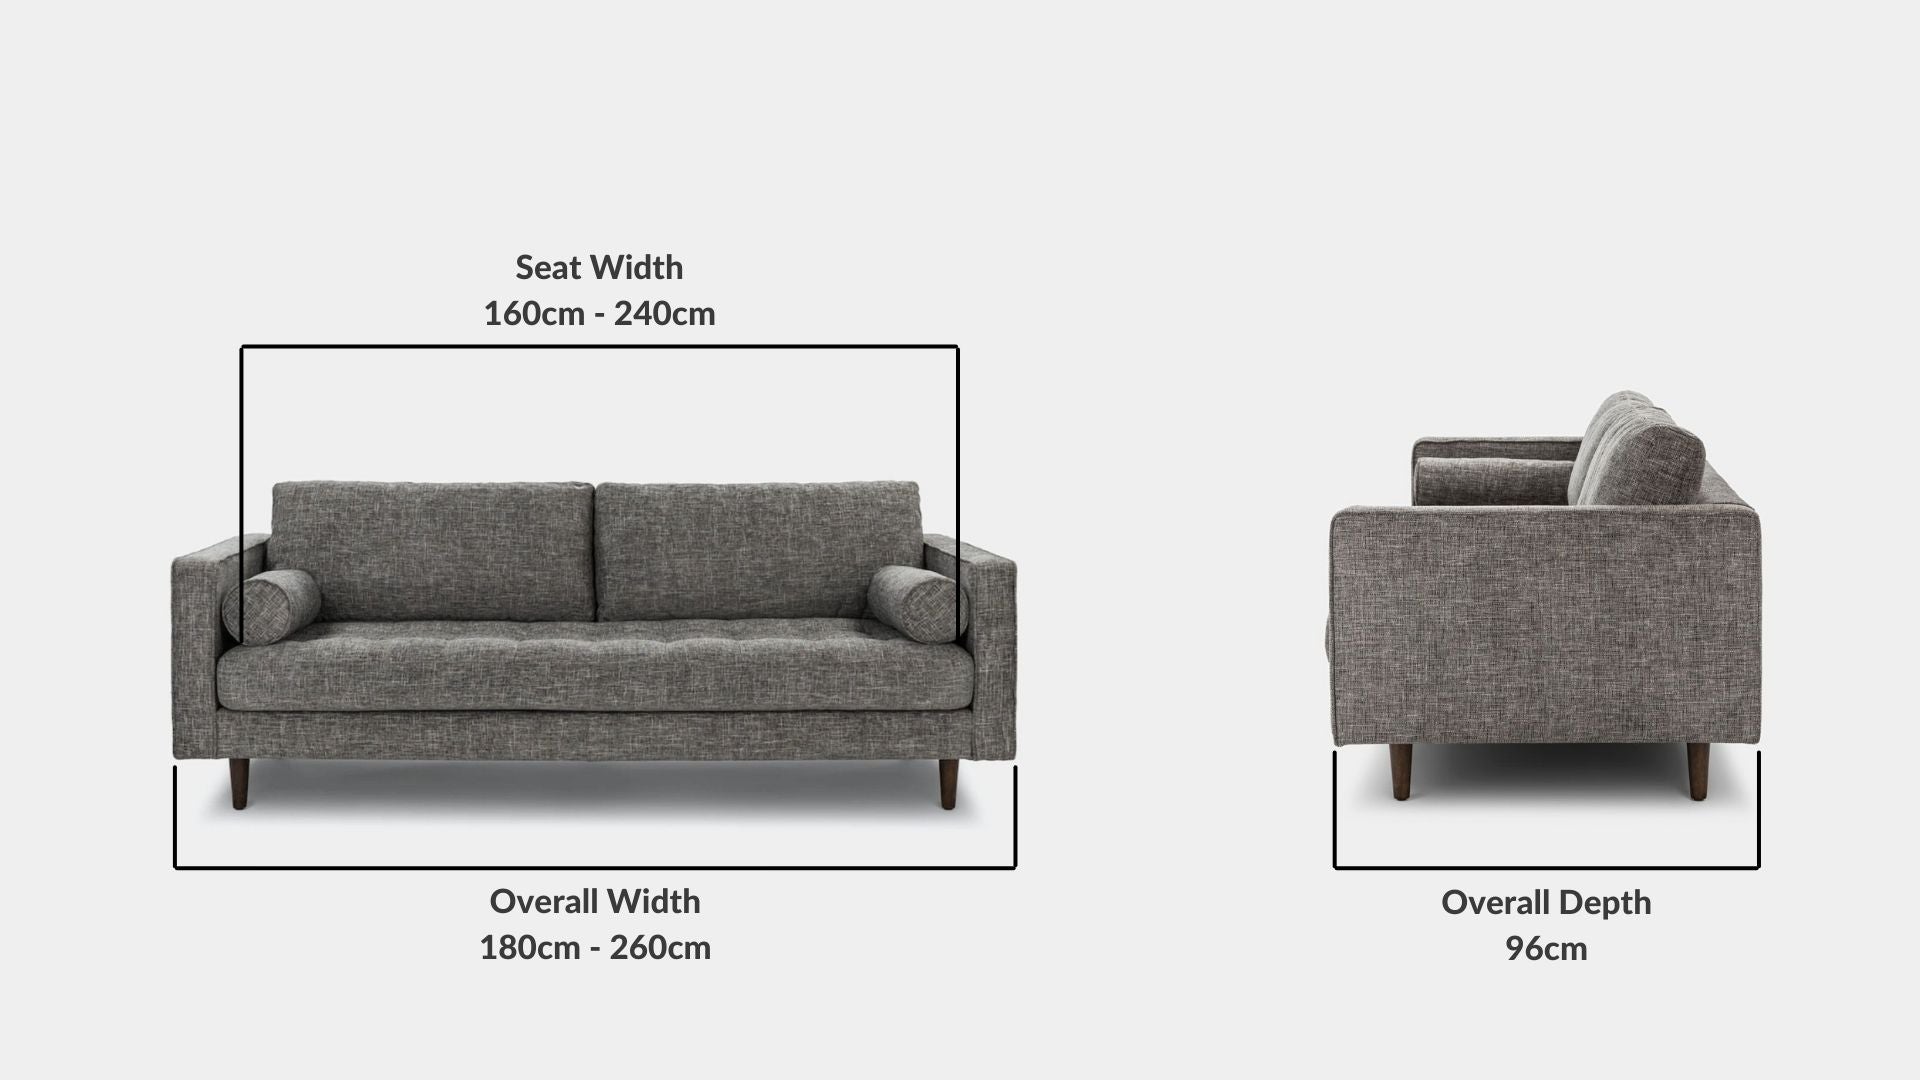 Details the key dimensions in terms of overall width, overall depth and seat width for Castle Fabric Sofa